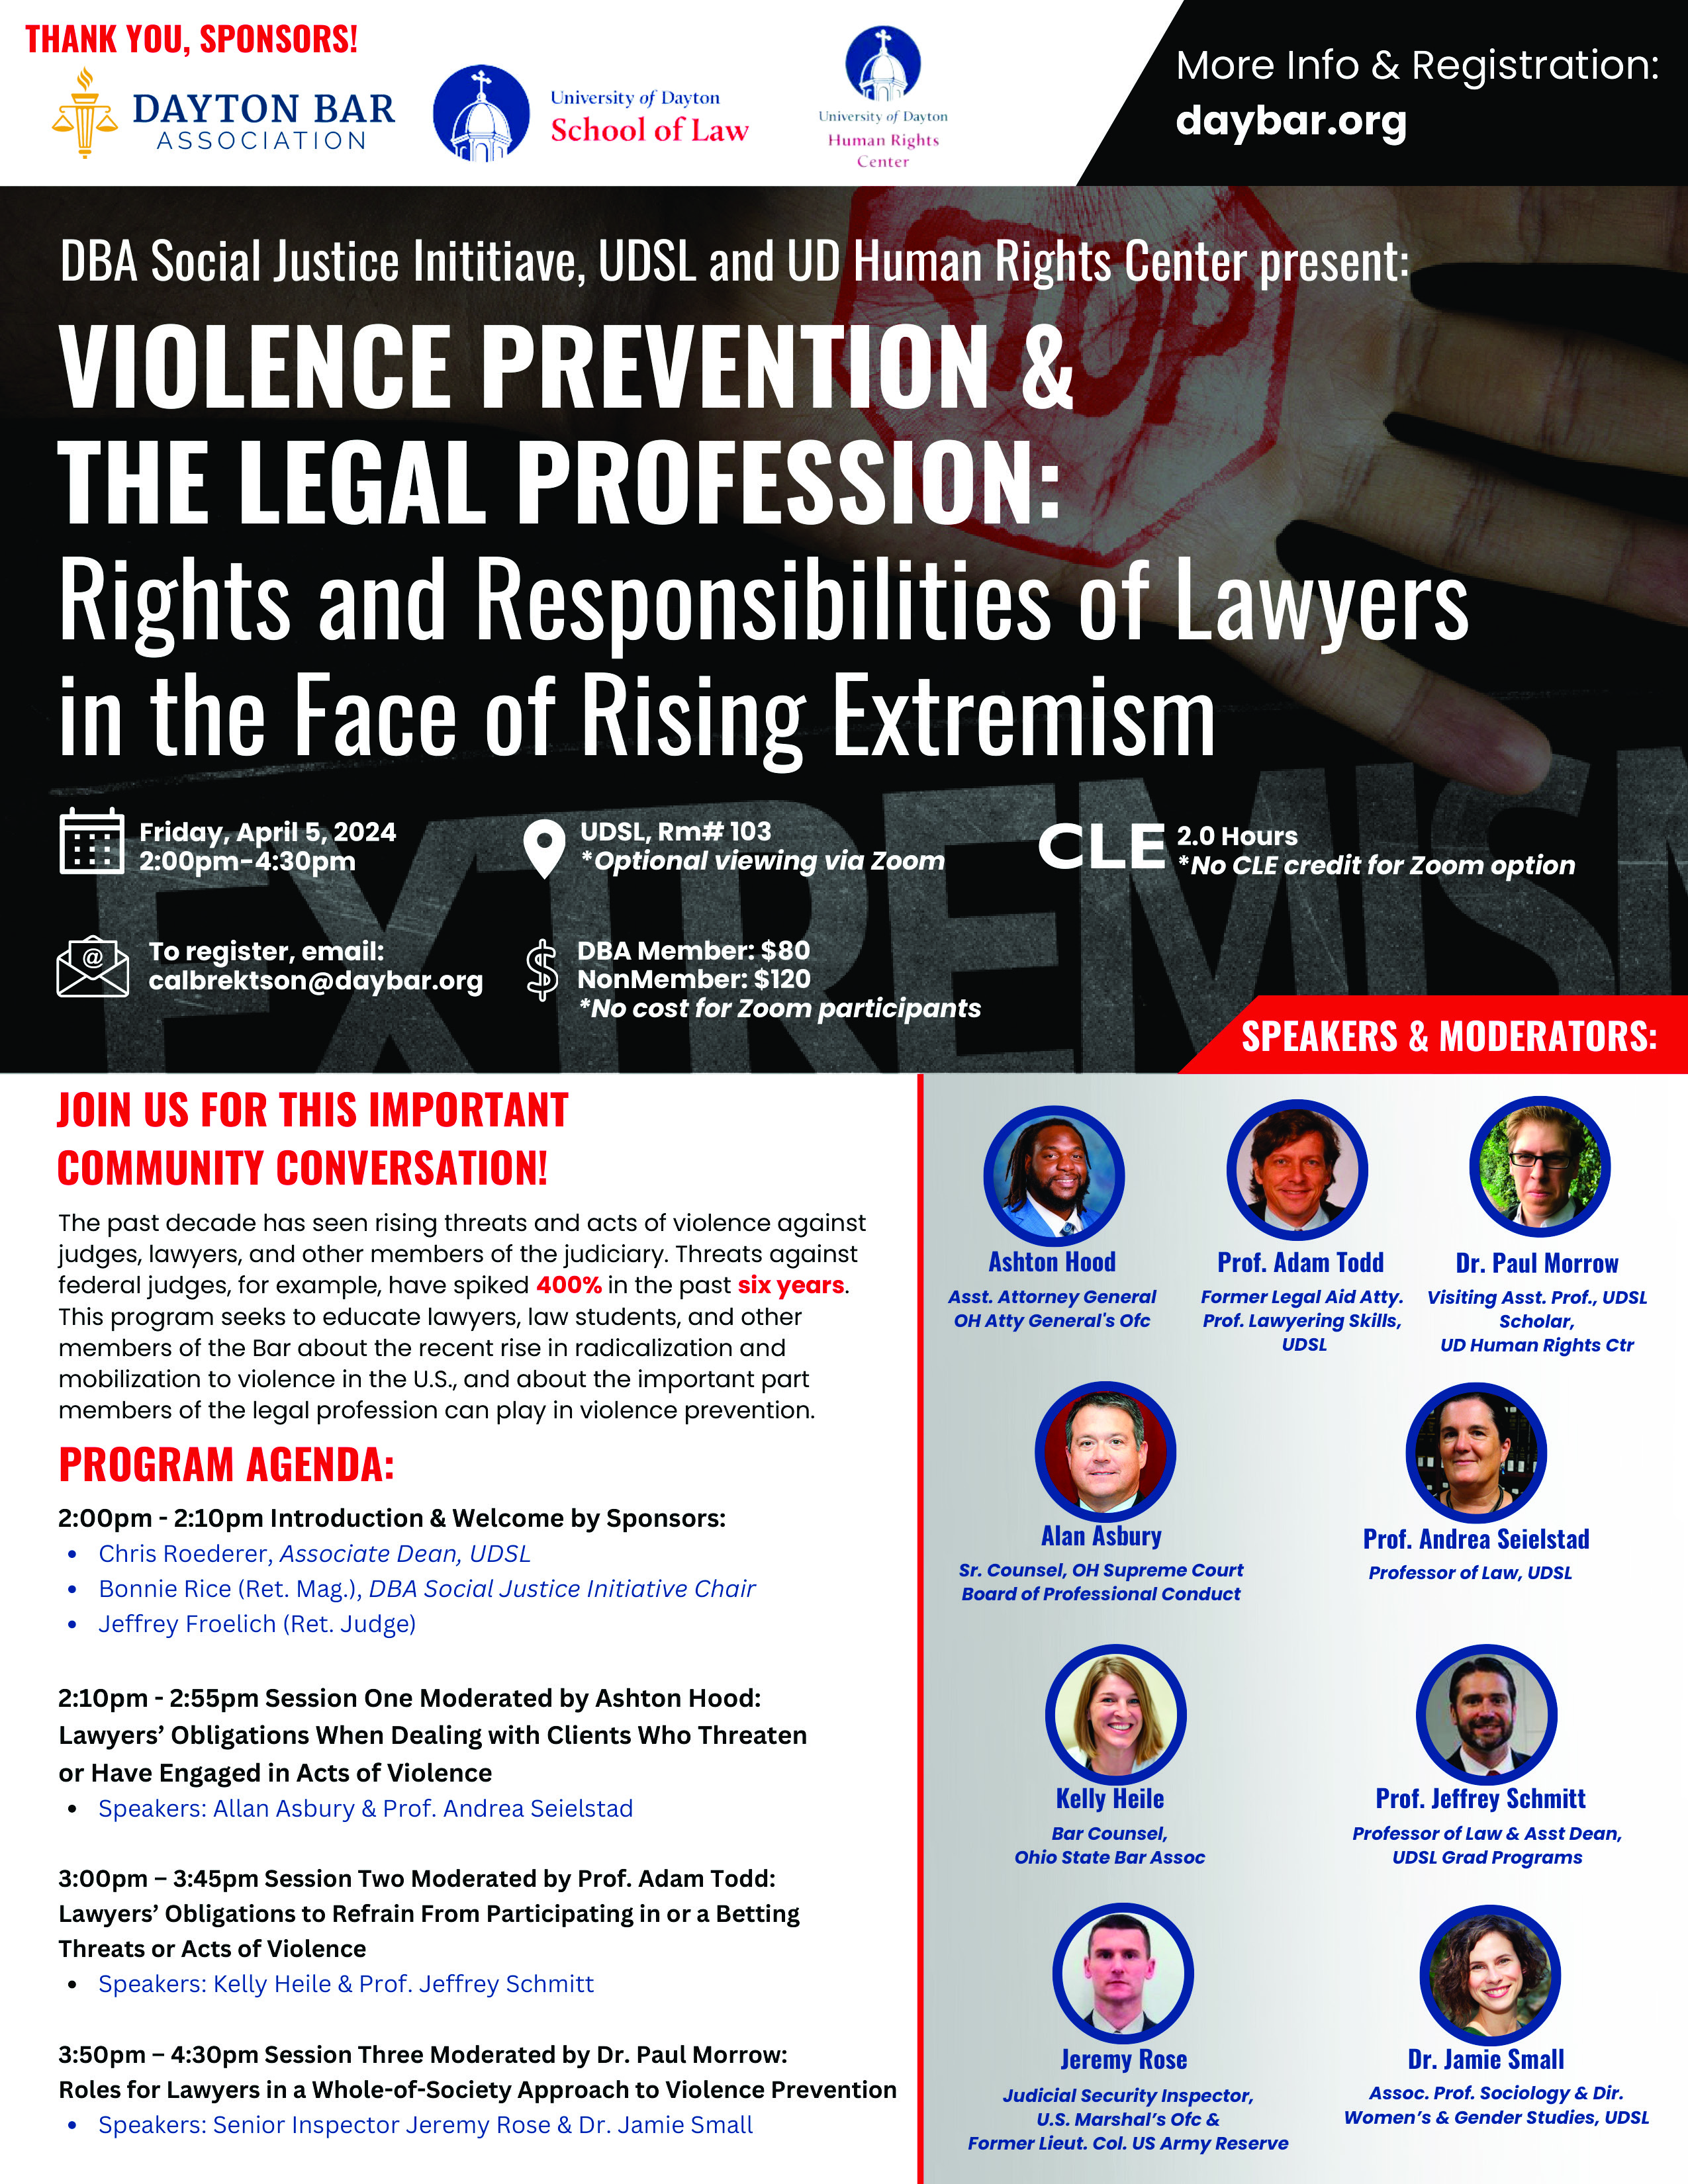 Violence Prevention and the Legal Profession